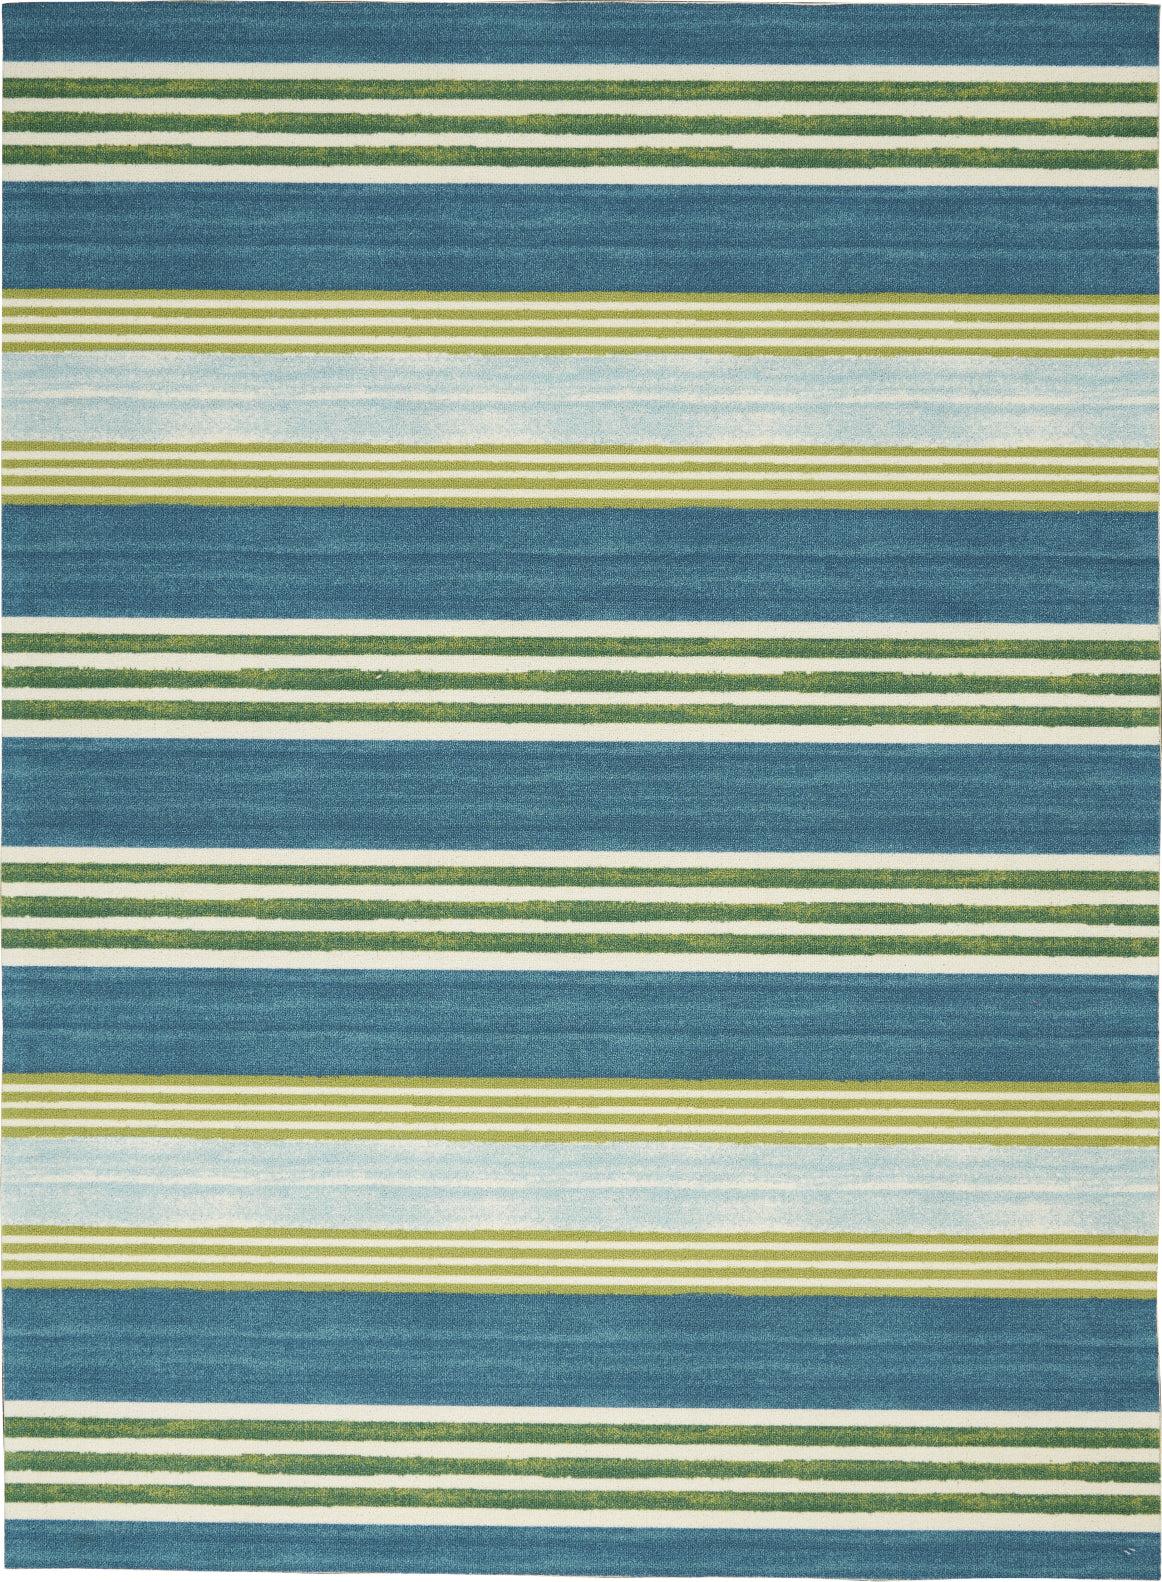 Nourison WAV01/Sun and Shade SND71 Green/Teal Area Rug by Waverly main image